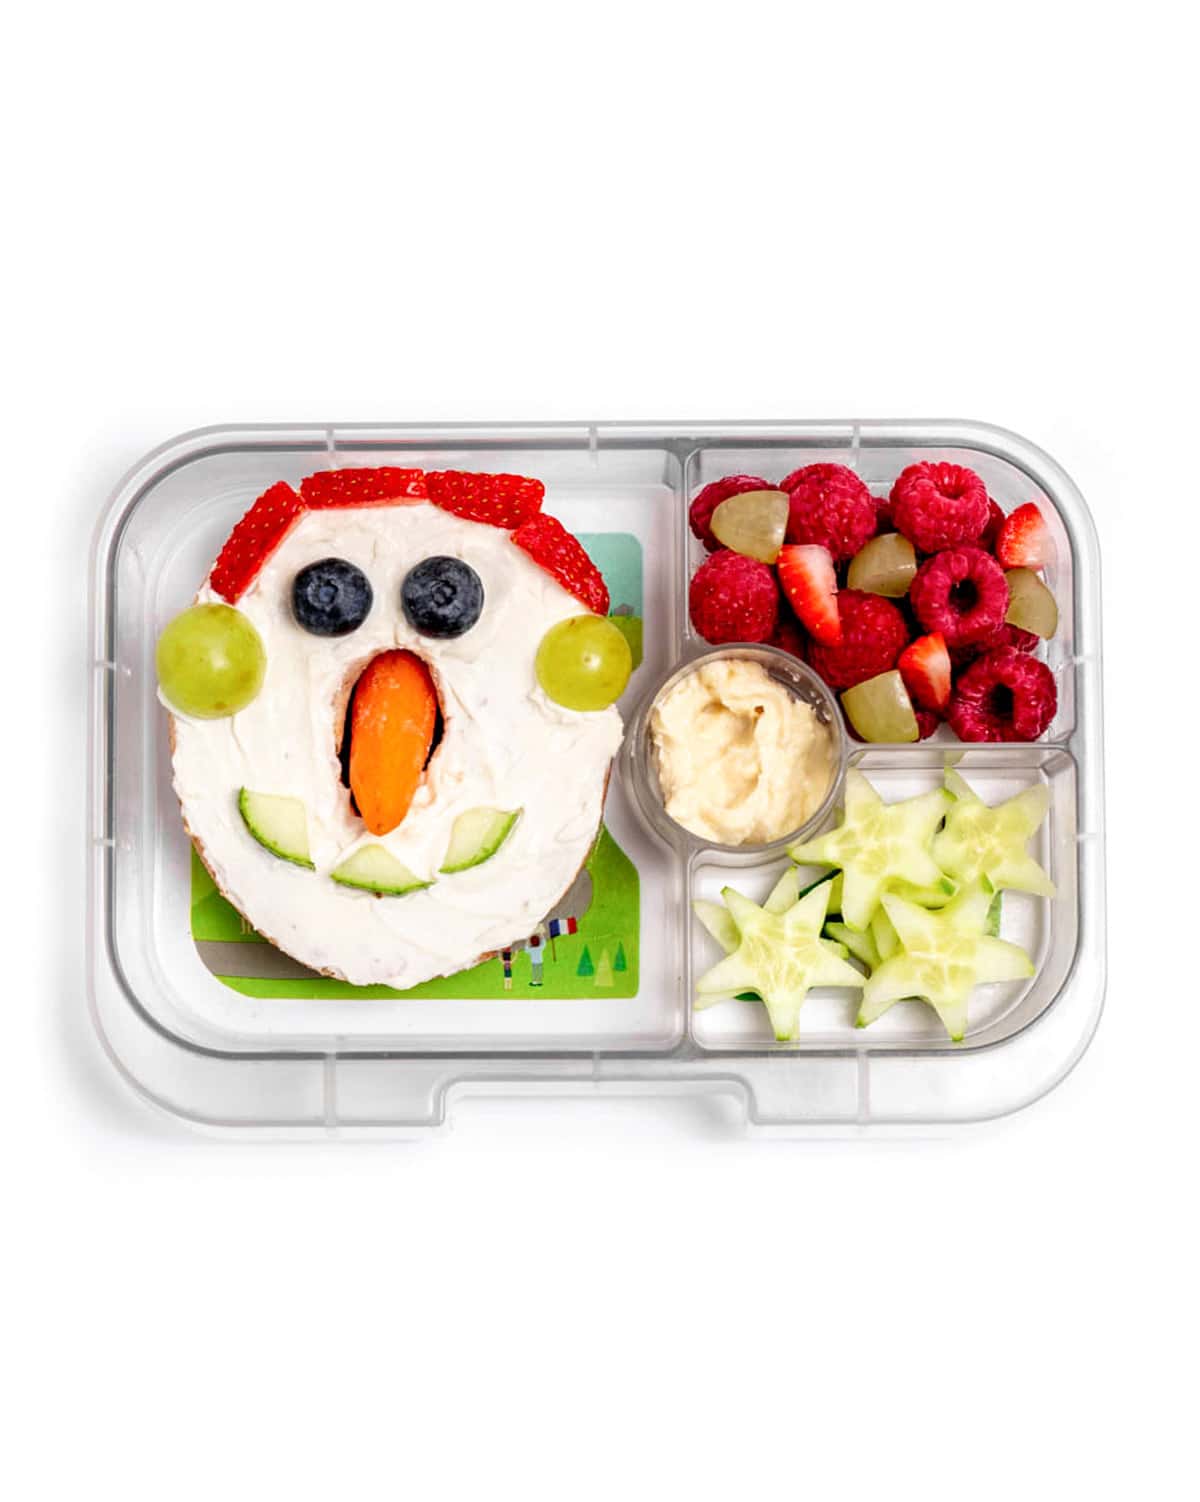 A lunchbox containing one snowman bagel, cucumber stars with a side of hummus, and a fruit mixtures of raspberries, strawberries and green grapes.